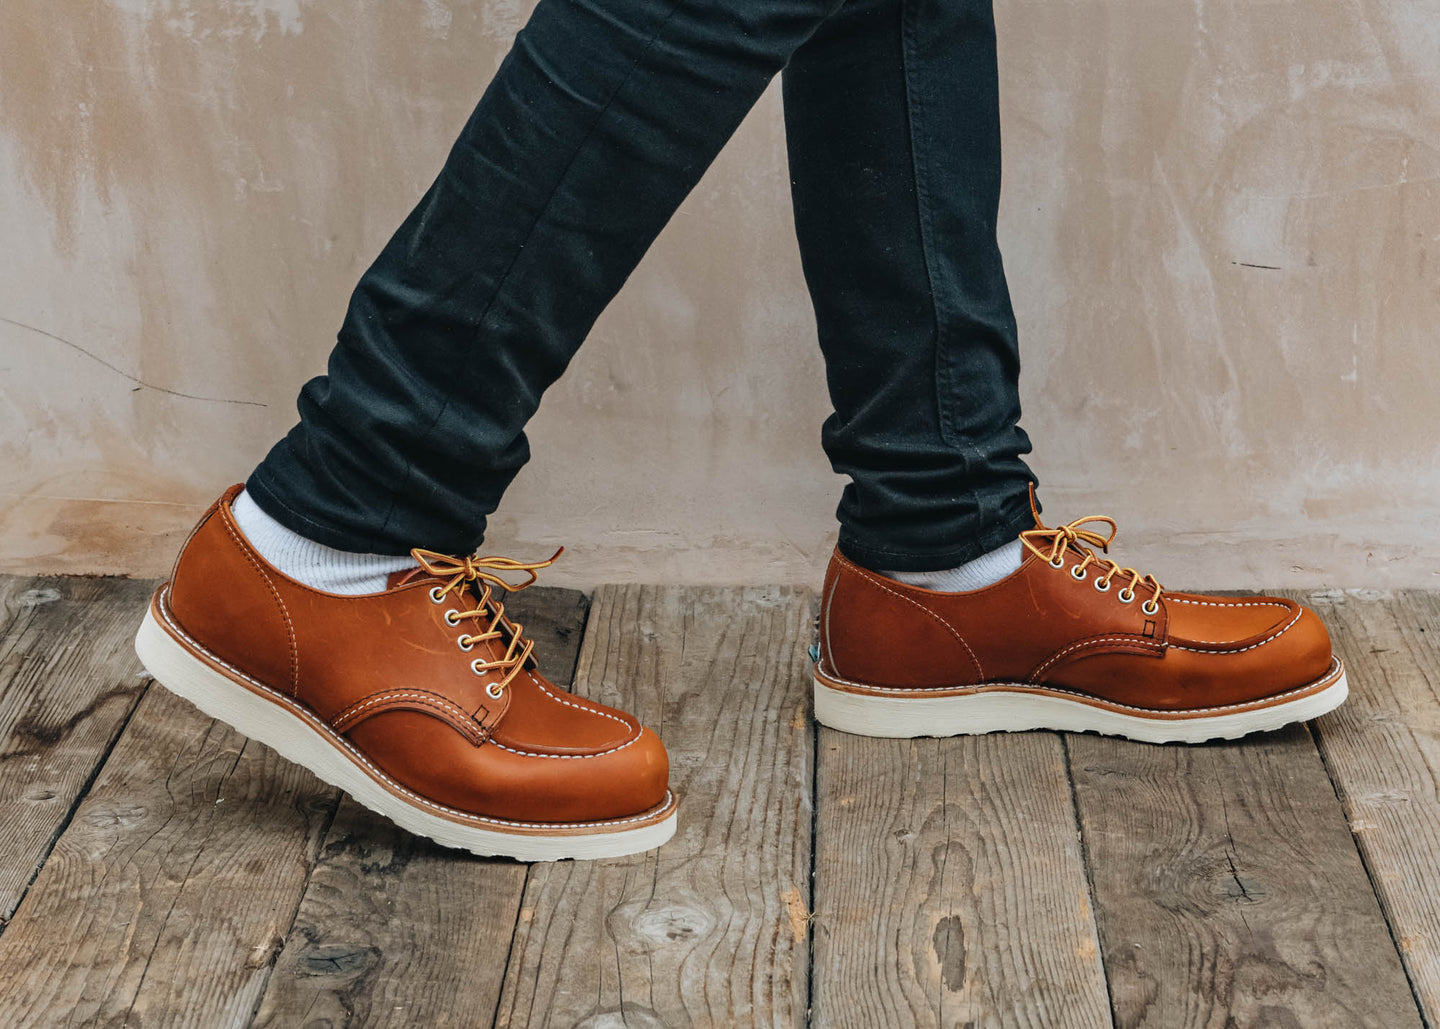 Red Wing 8092 Shop Moc Oxford Shoes in Oro Legacy